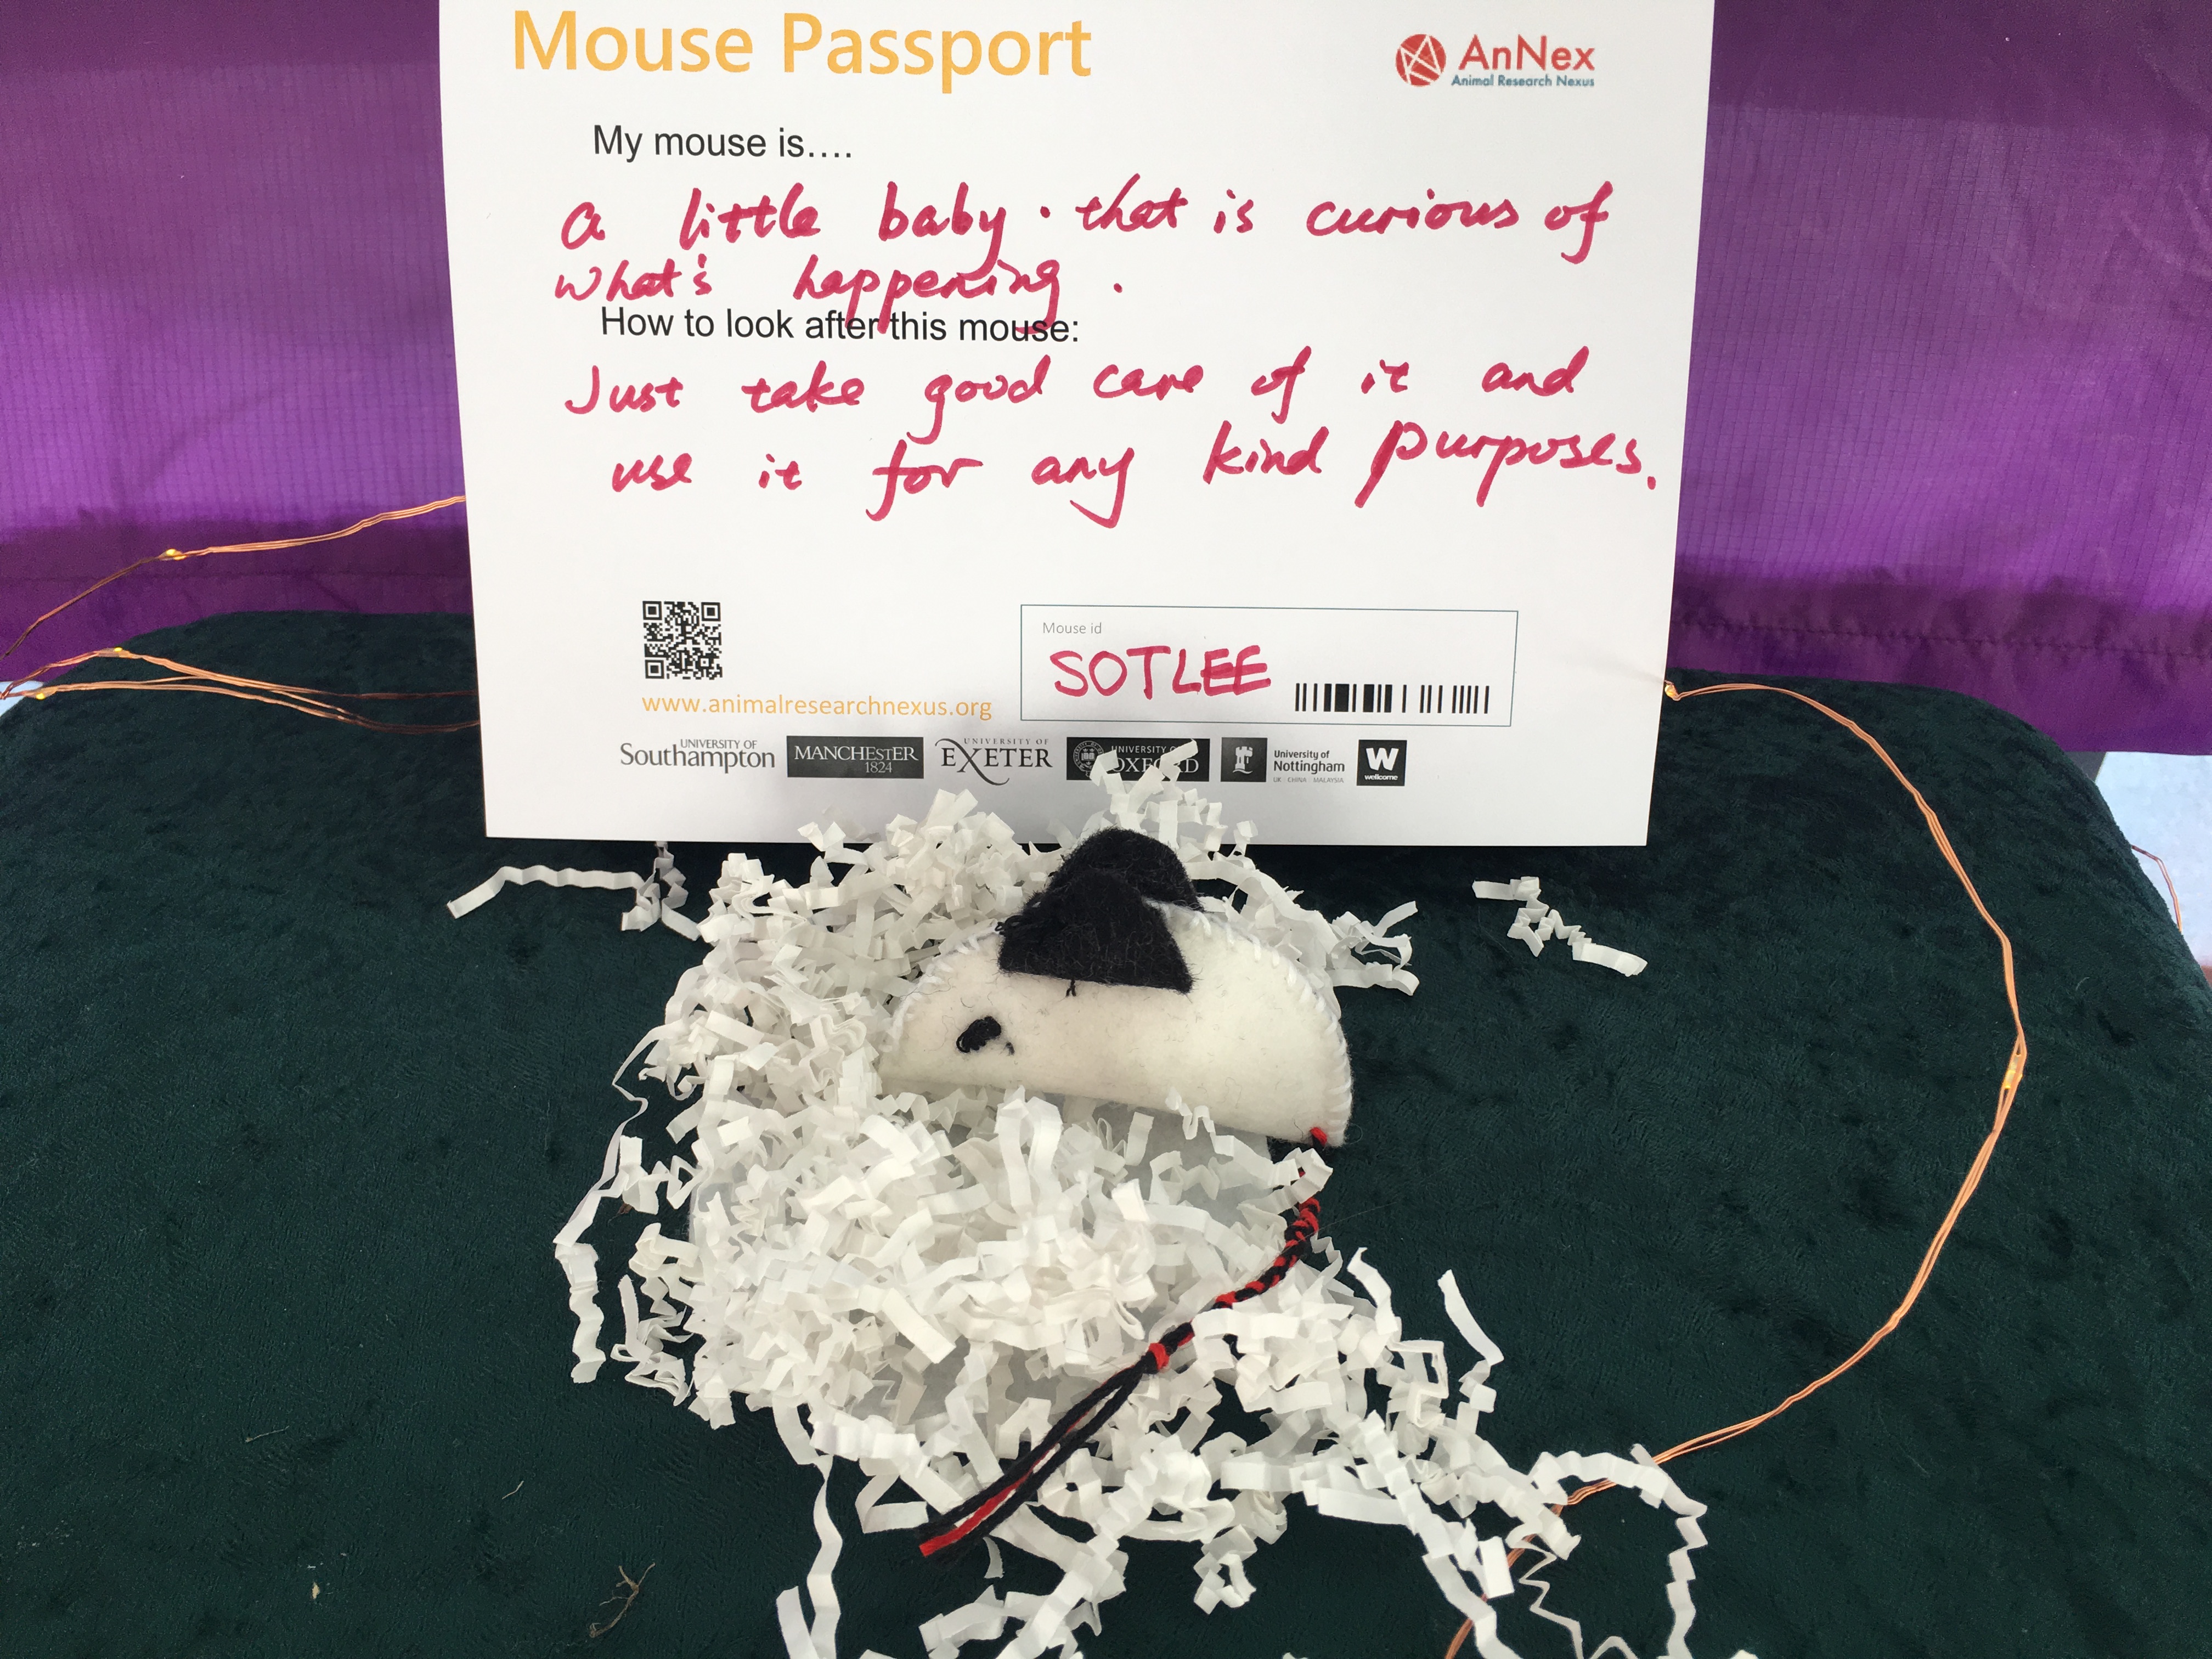 Mouse passport with the instructions - use it for any kind purposes